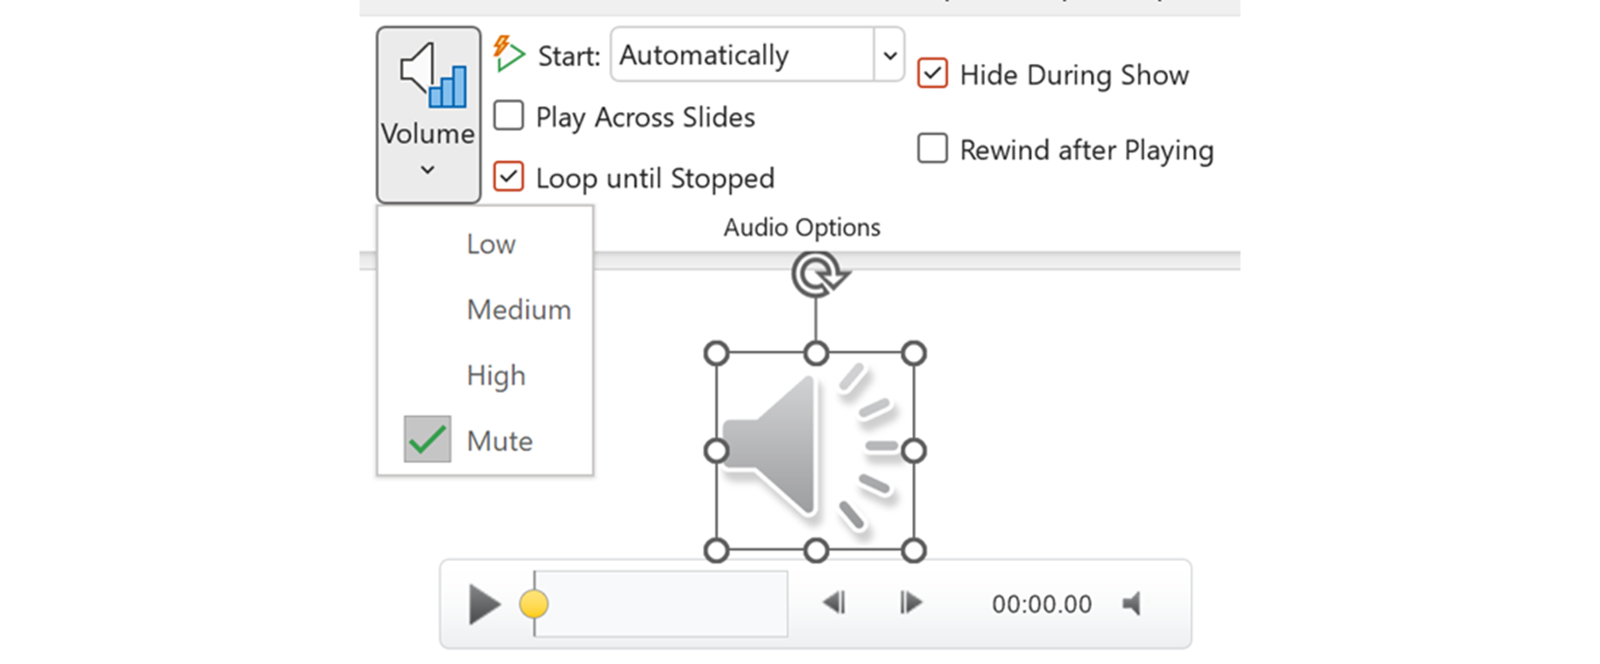 Screenshot of the audio file options in PowerPoint showing all the settings selected as described in the text.